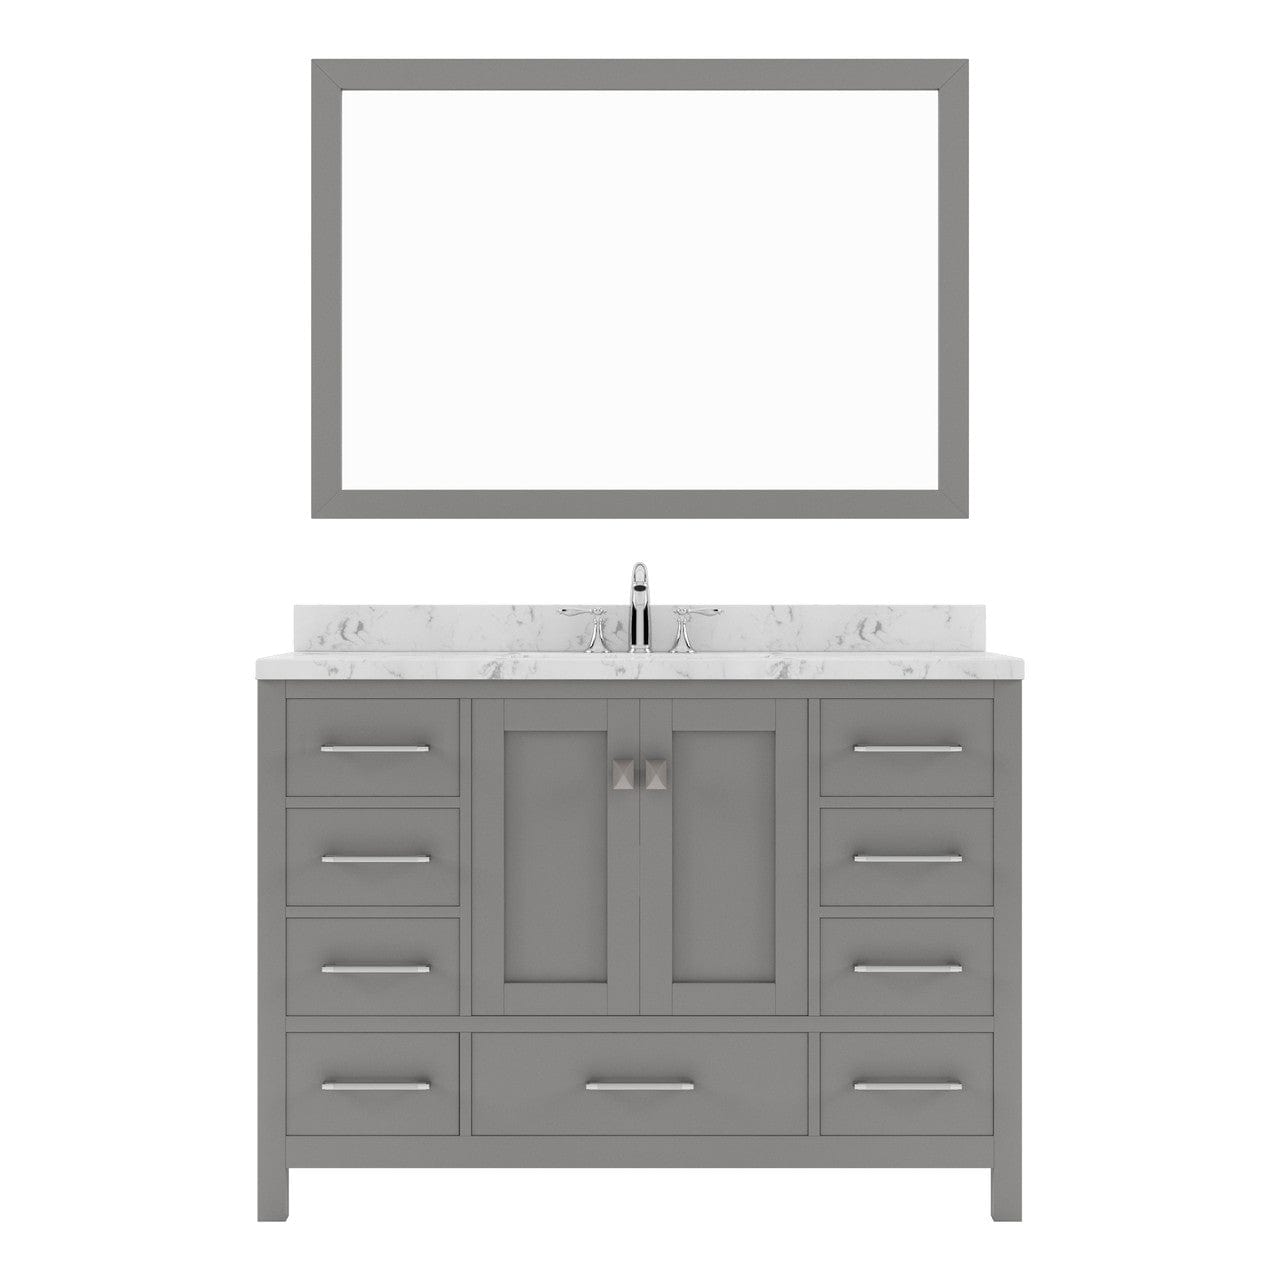 Caroline Avenue 48" Single Bath Vanity in Cashmere Gray with Quartz Top and Sink front view white background